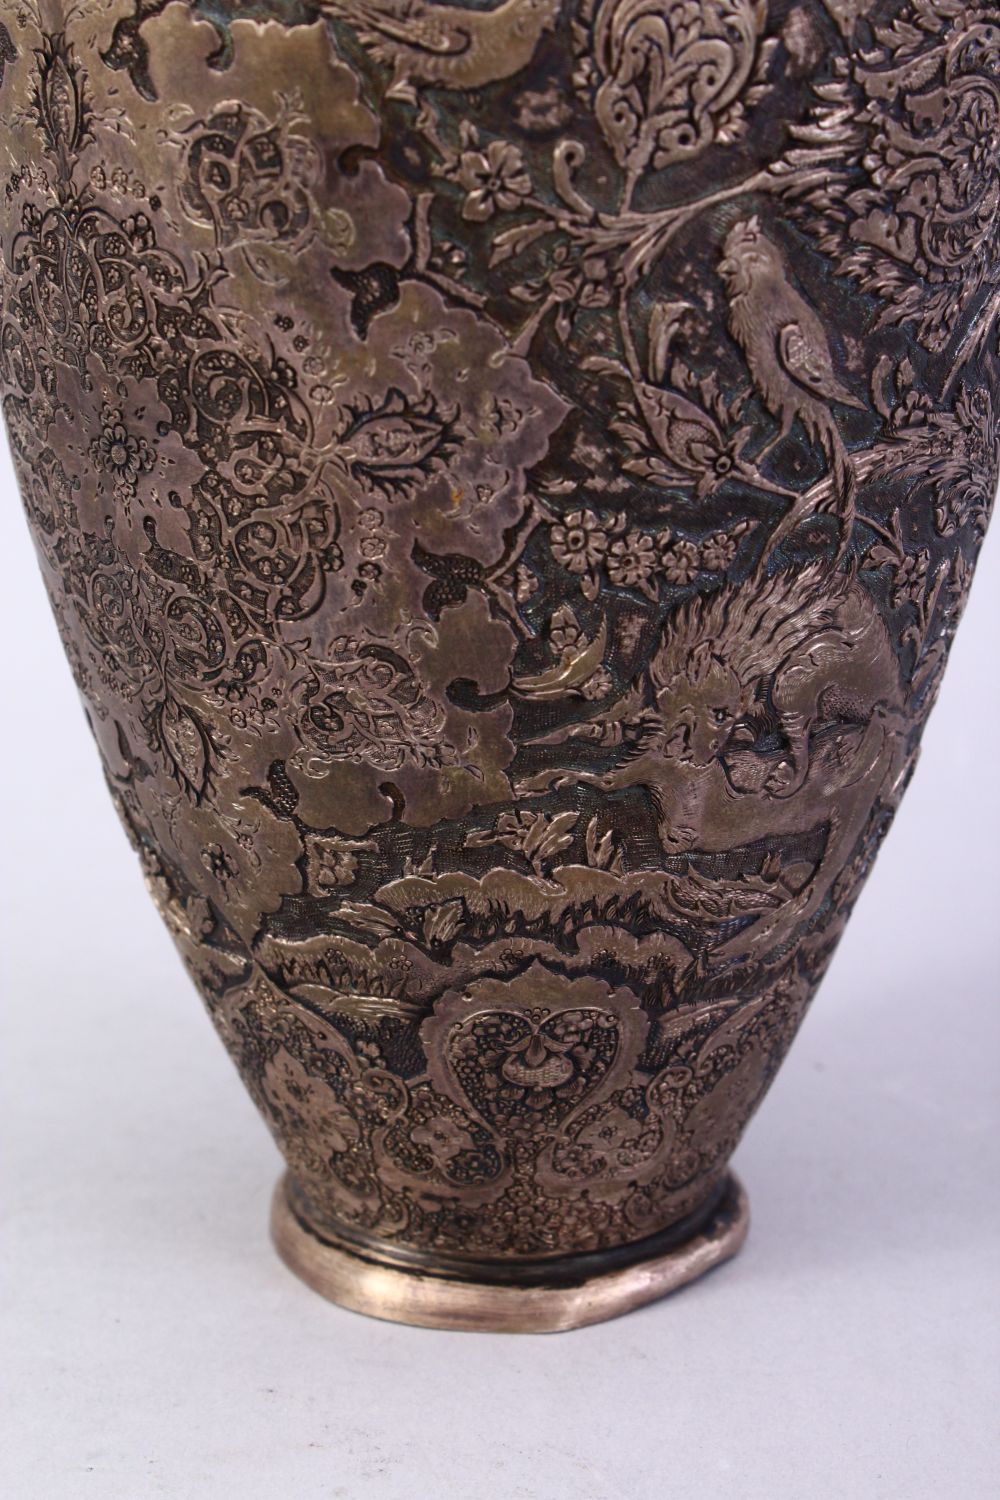 A 18TH / 19TH CENTURY IRANIAN CARVED SILVER VASE, with a multitude of decoration depicting flora and - Image 10 of 12